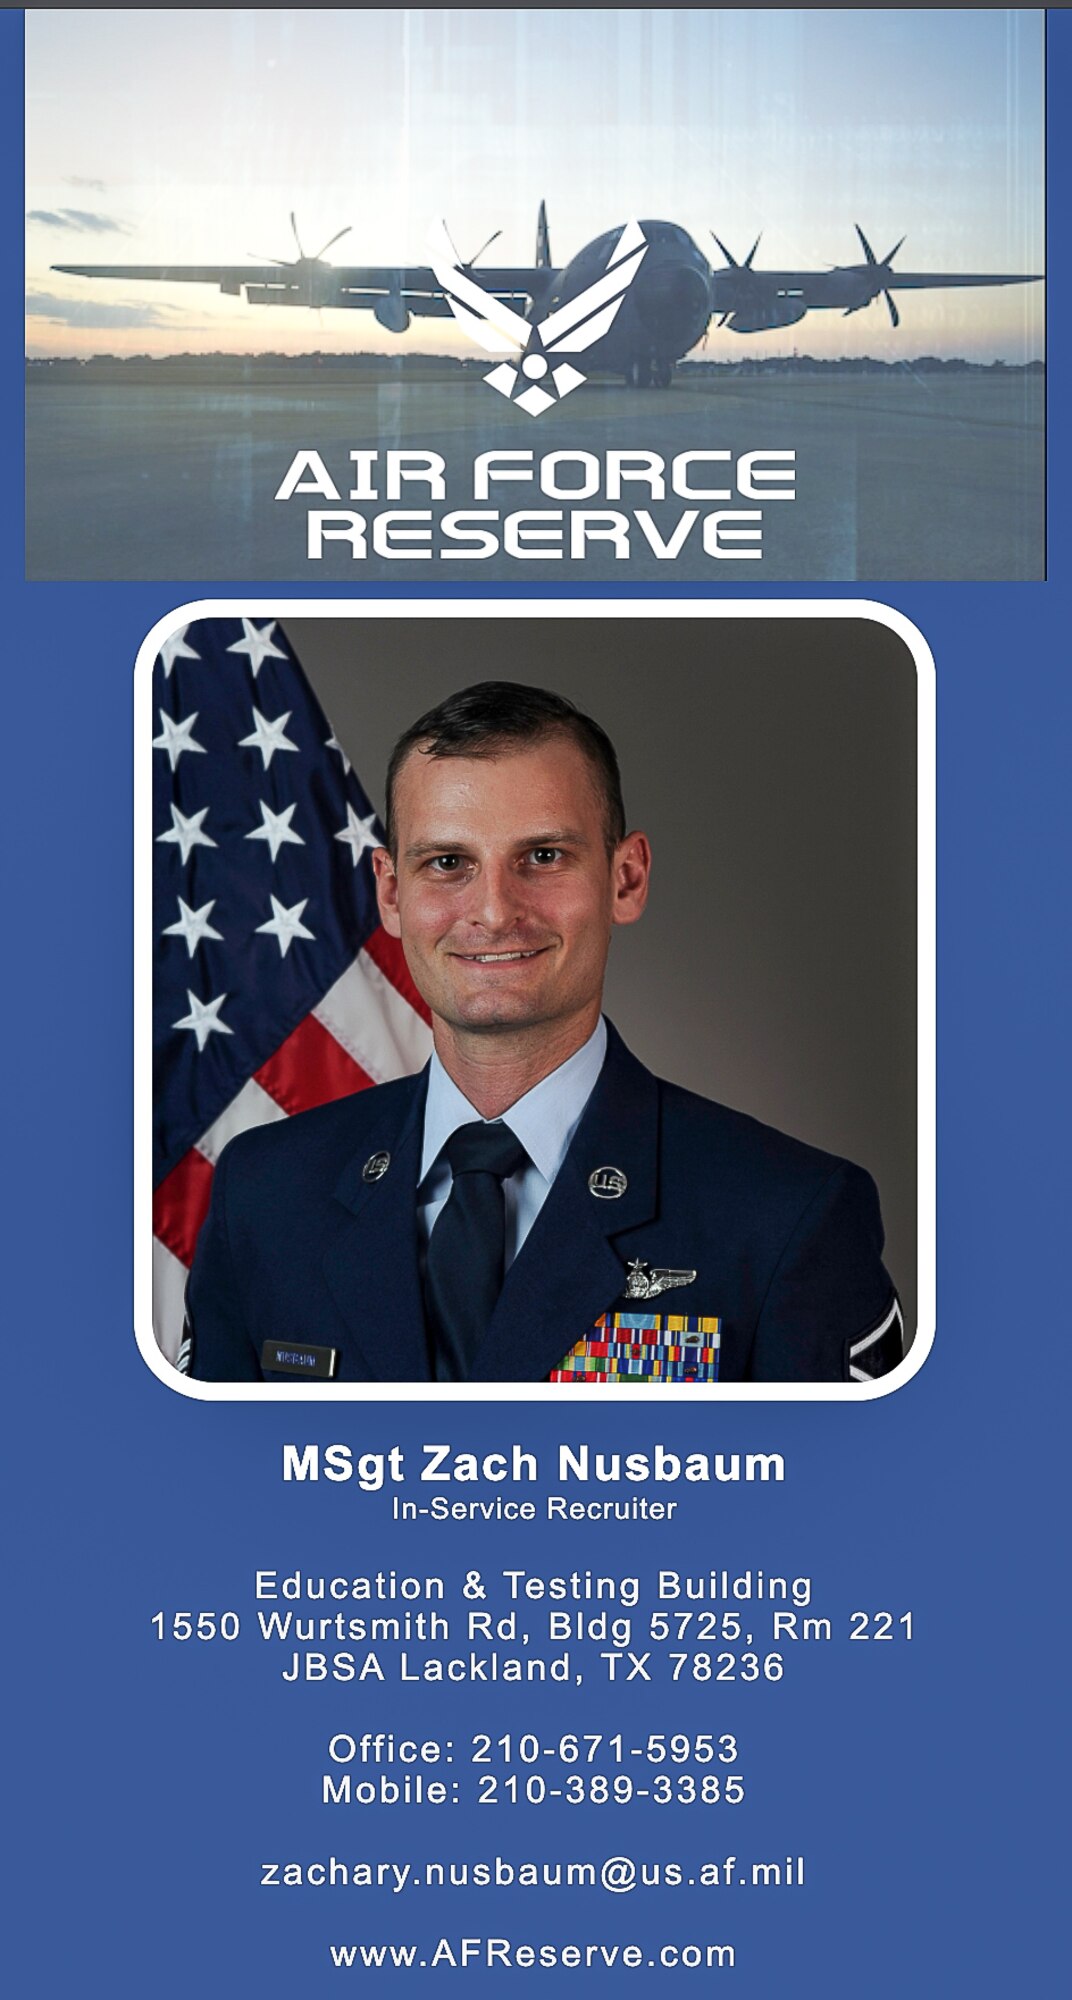 Electronic business card for Air Force Reserve recruiter